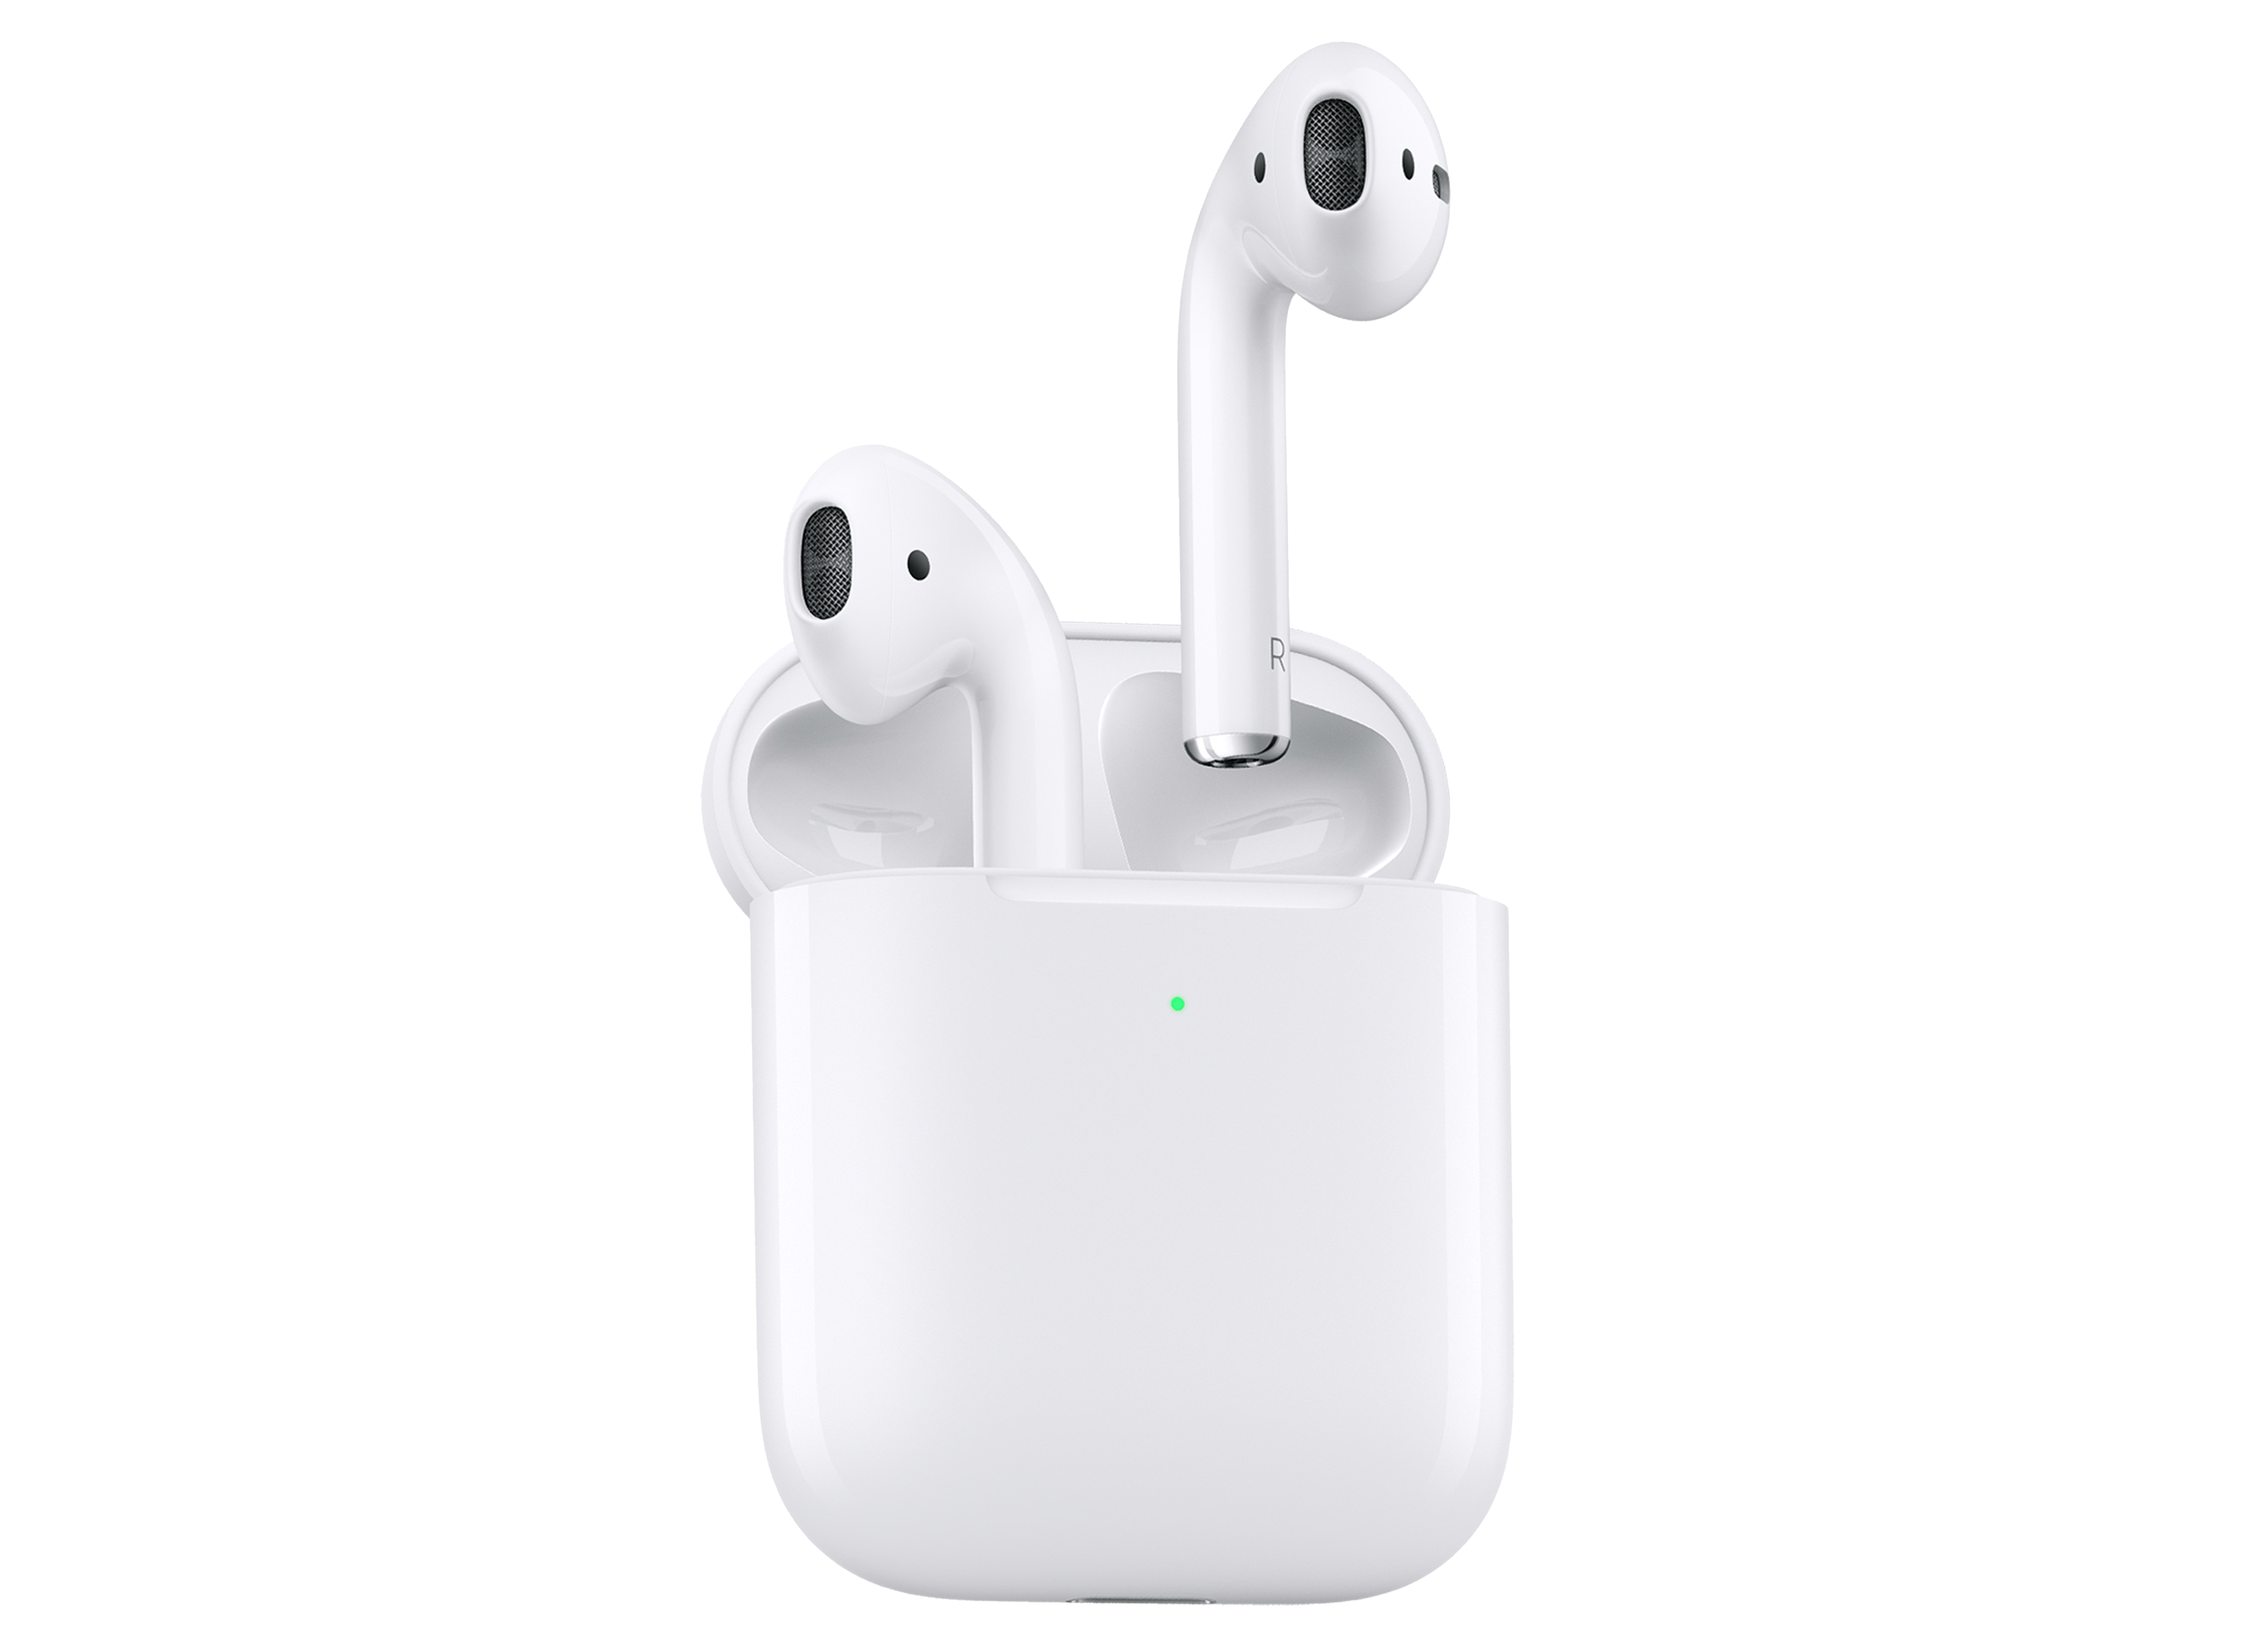 Fremskynde Stuepige undertøj Apple AirPods (2nd Gen) with Wireless Charging Case Headphone Review -  Consumer Reports